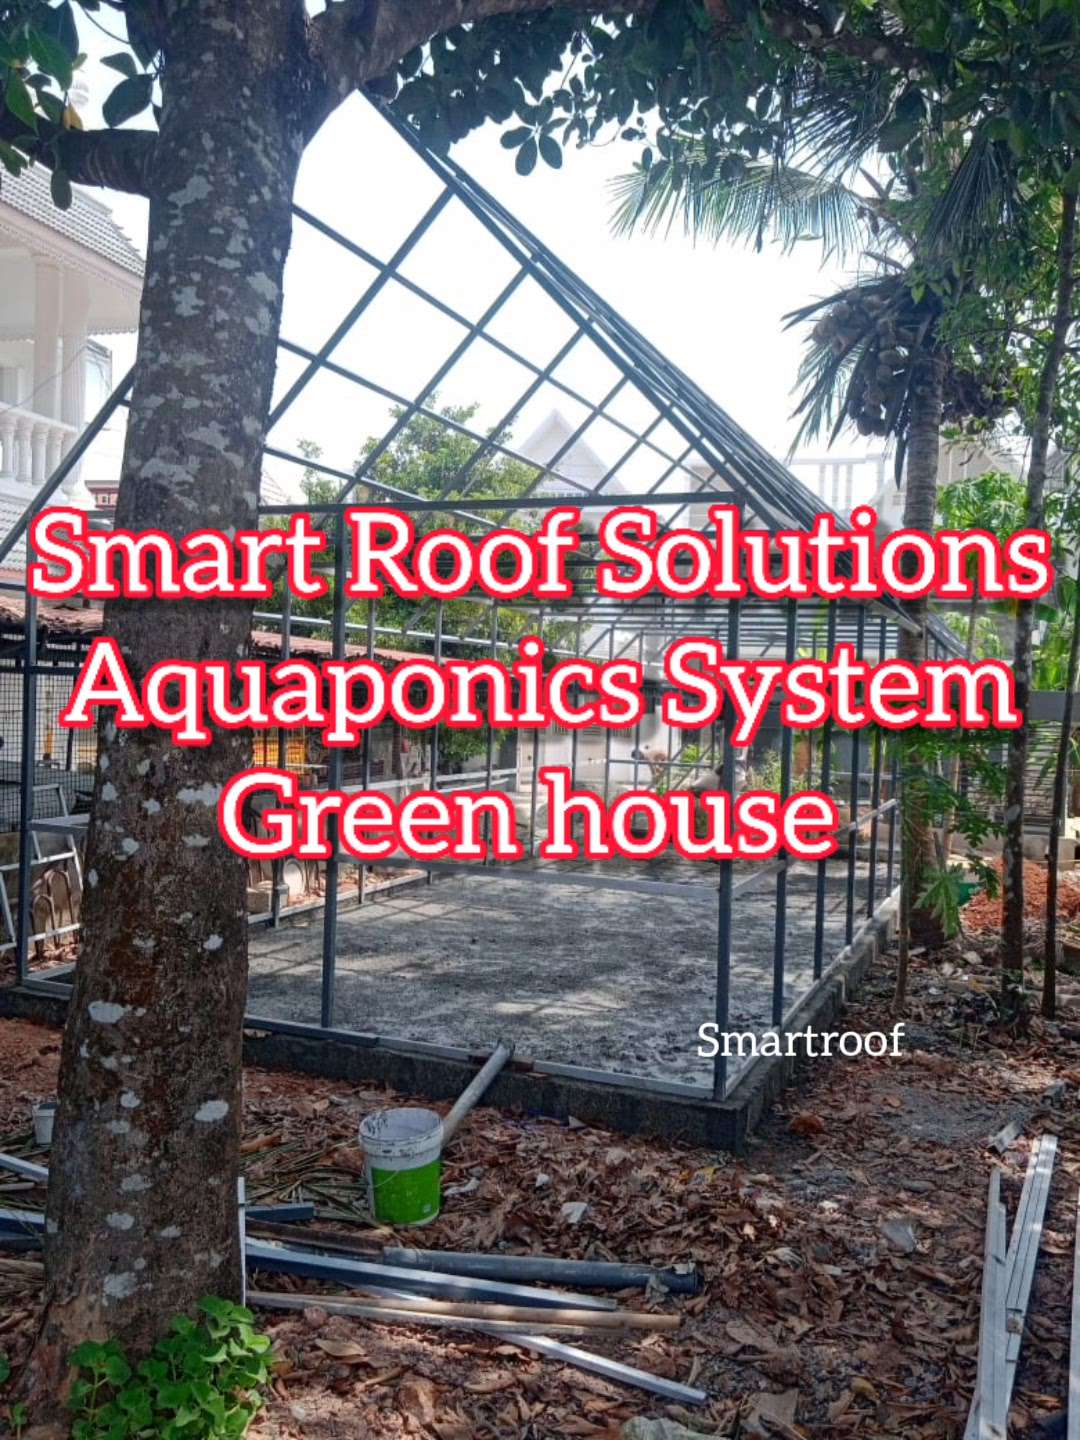 Aqua phonics System & Green house - by Smartroof Solutions

#greenhouse #fishtank #gardendesign